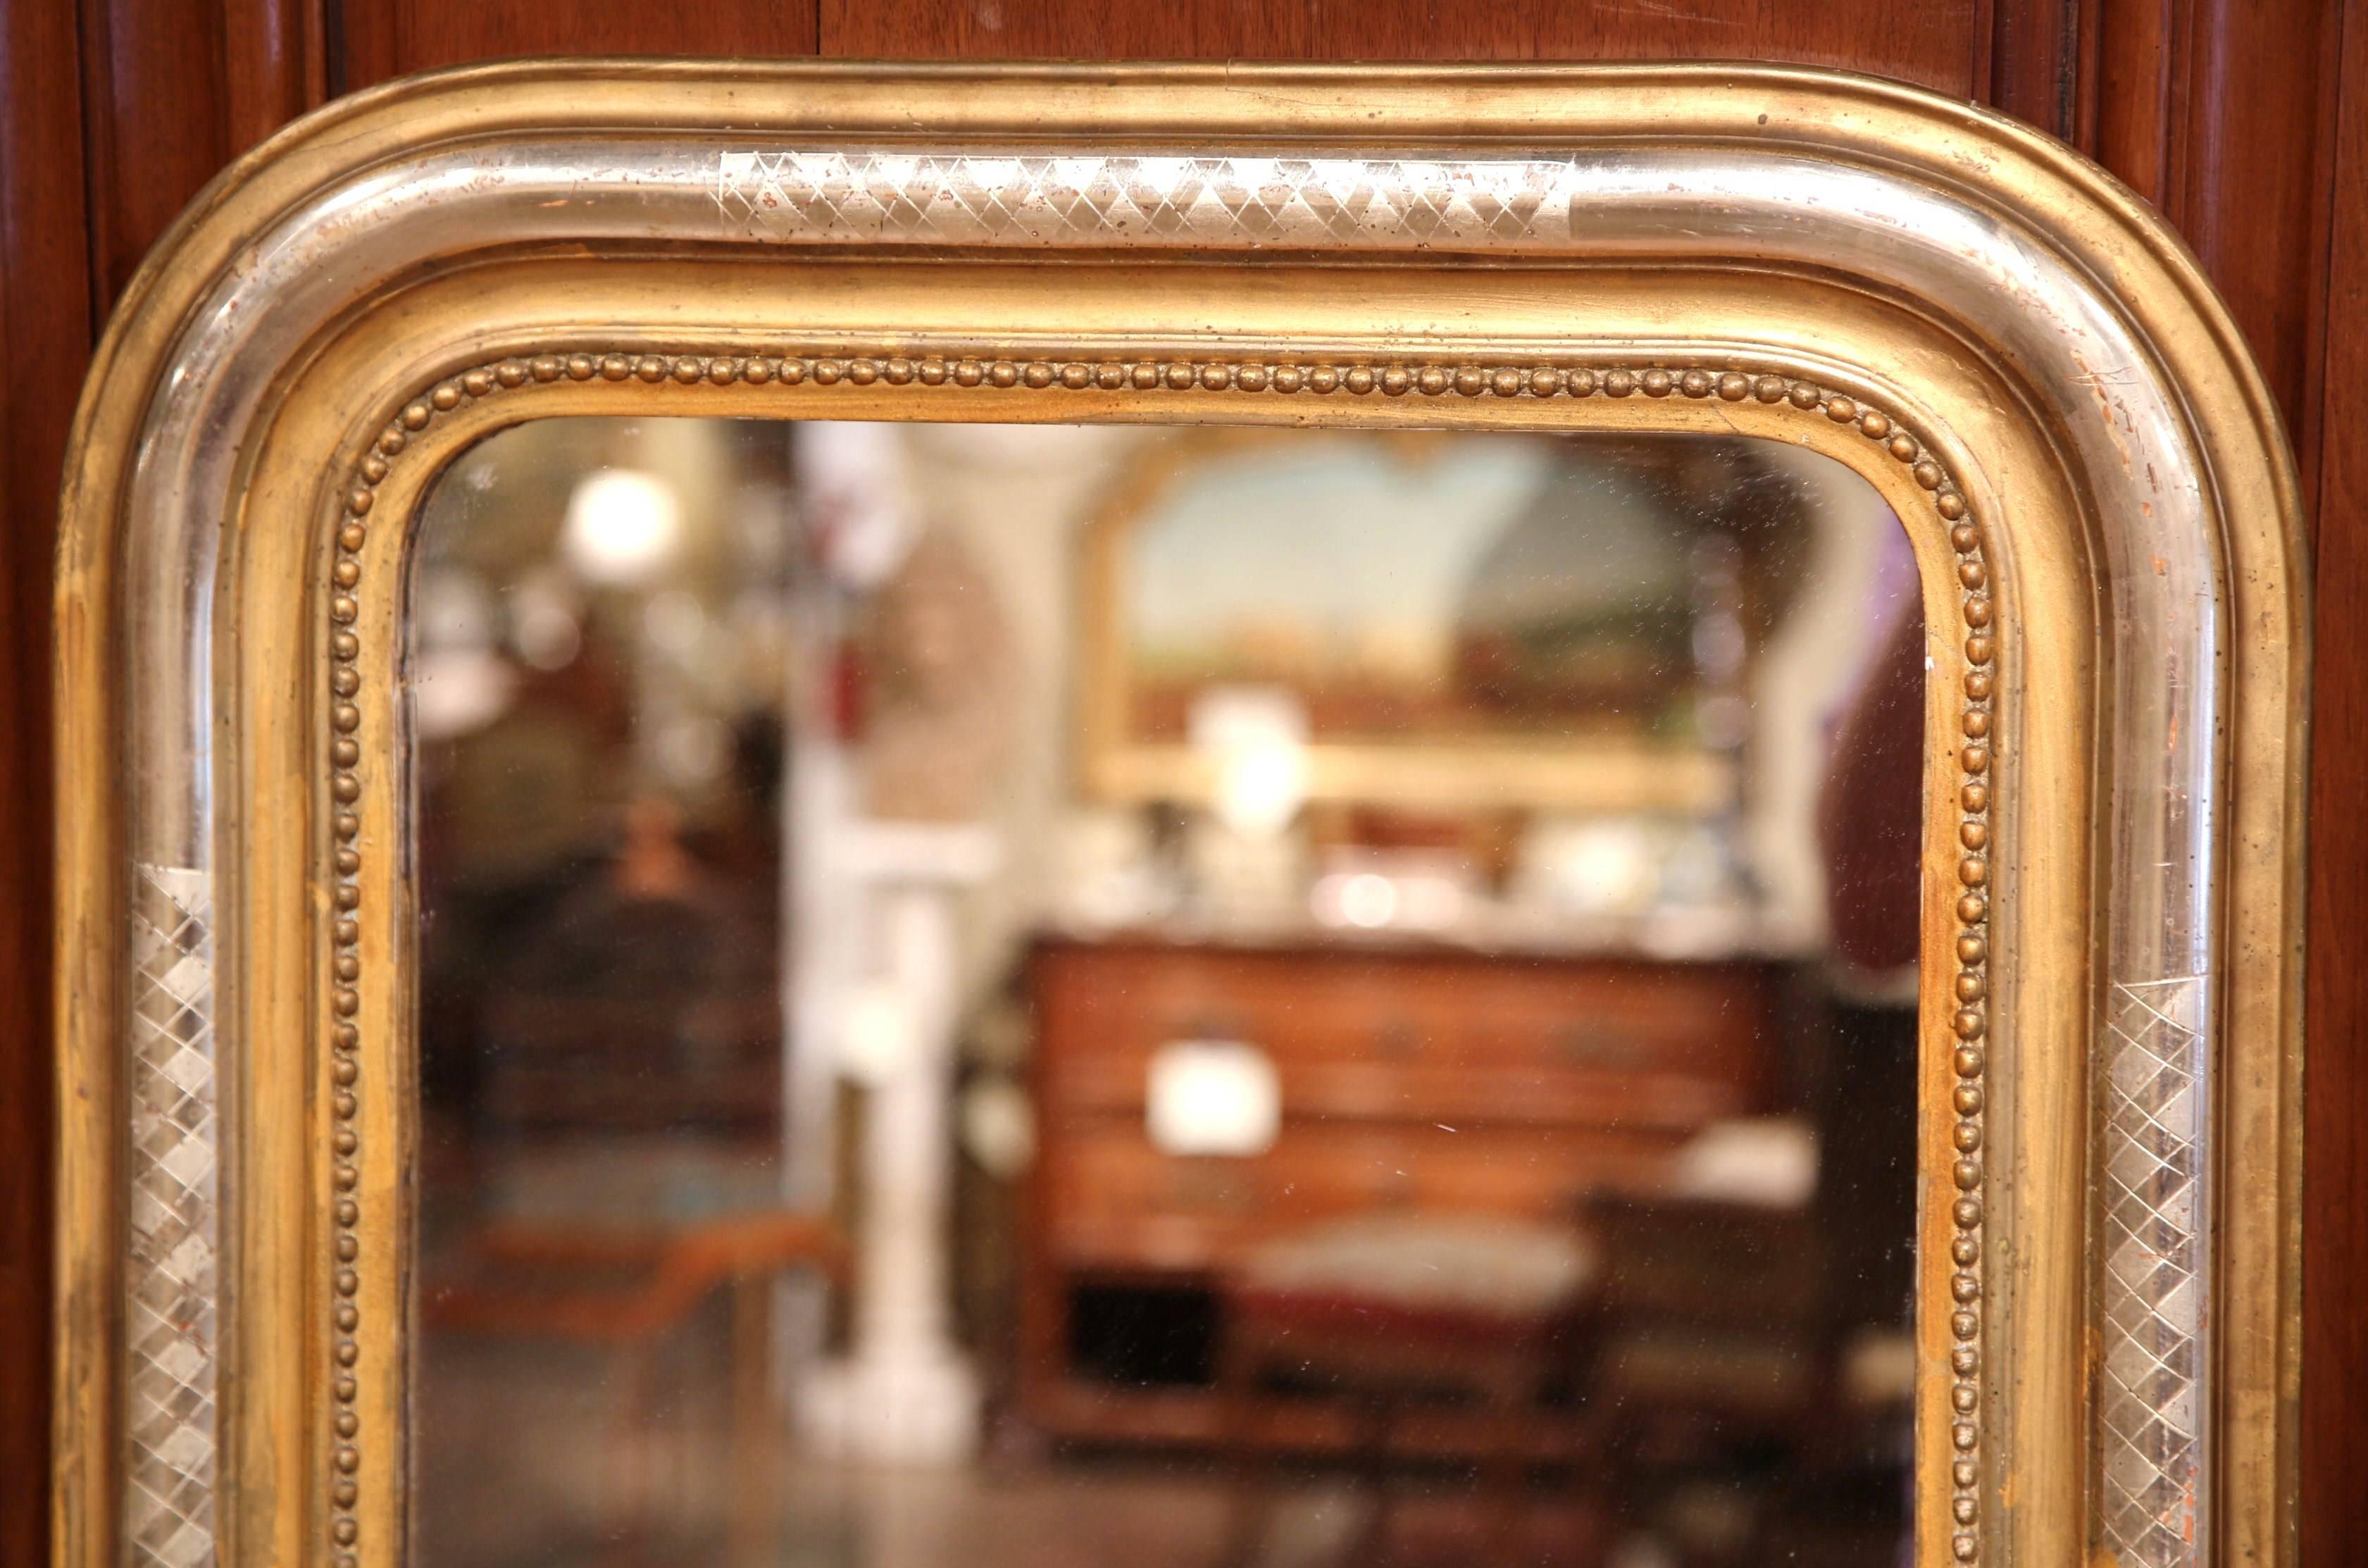 This elegant, small Louis Philippe mirror was crafted in France, circa 1860. The antique wall hanging mirror has a beautiful two-tone gold and silver leaf frame further embellished by beads around the frame, and engraved diamond decor on all four